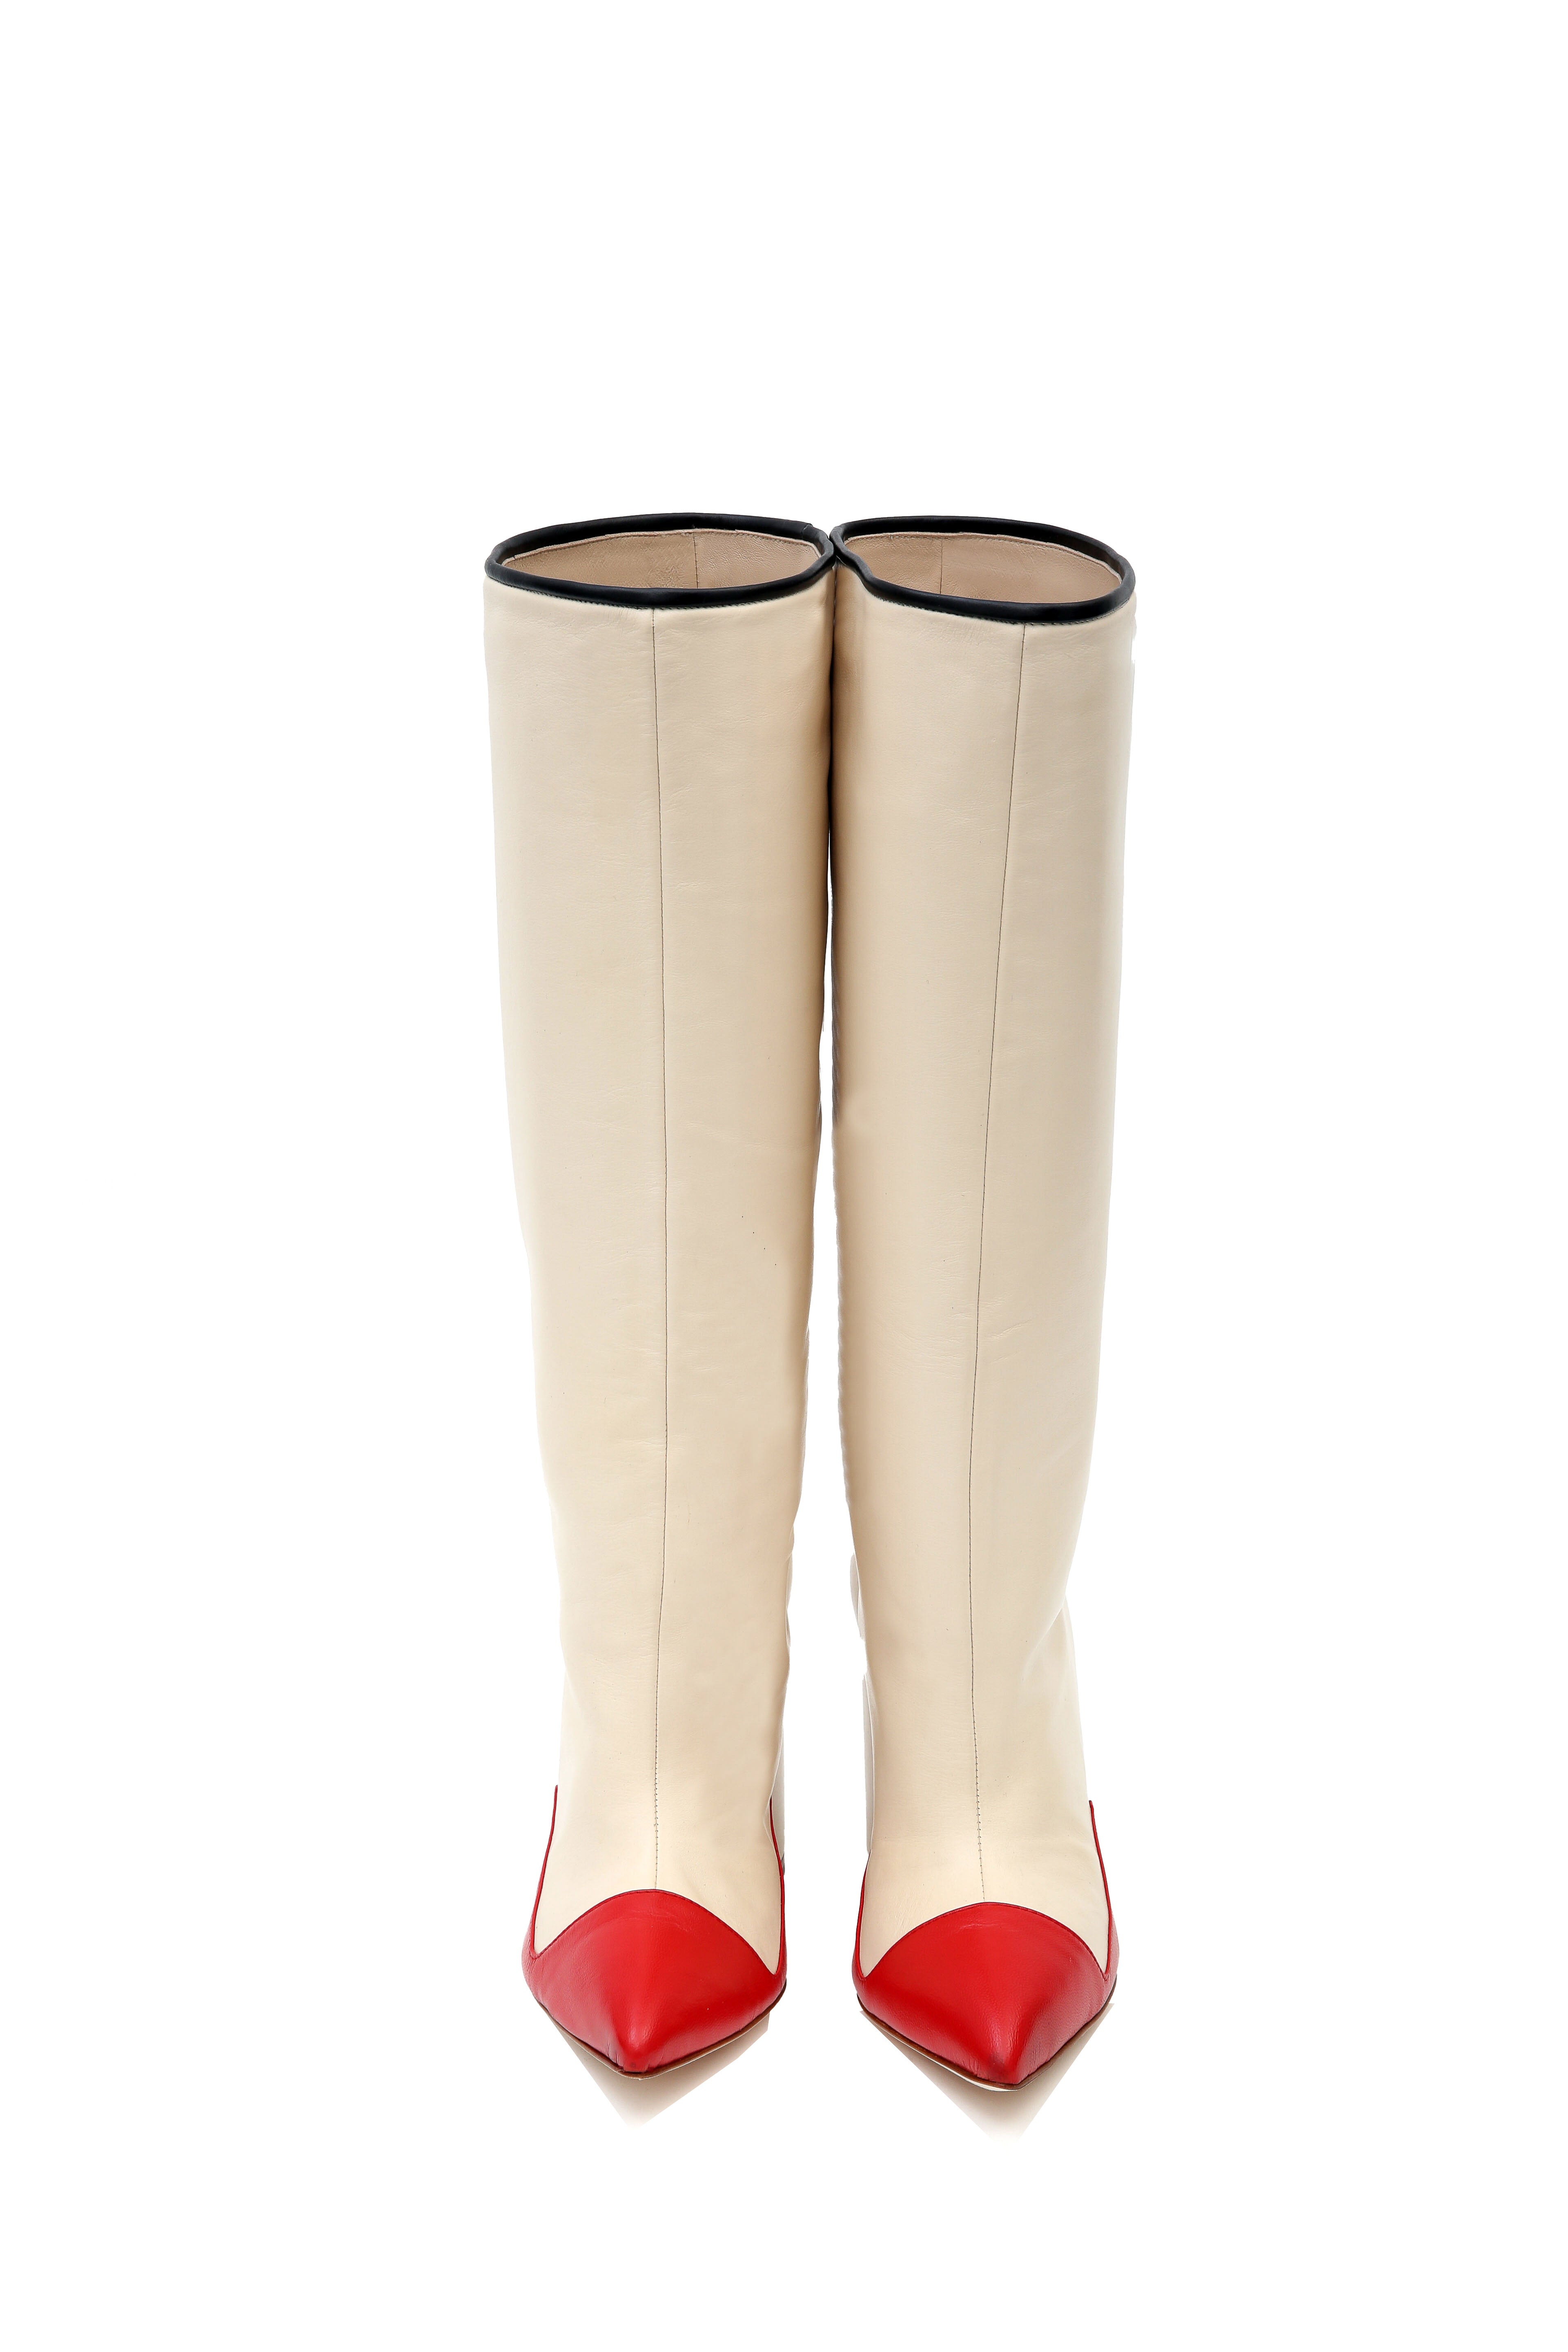 Candy Buttercup Cream and Ruby Red Calfskin Pull-on Boots